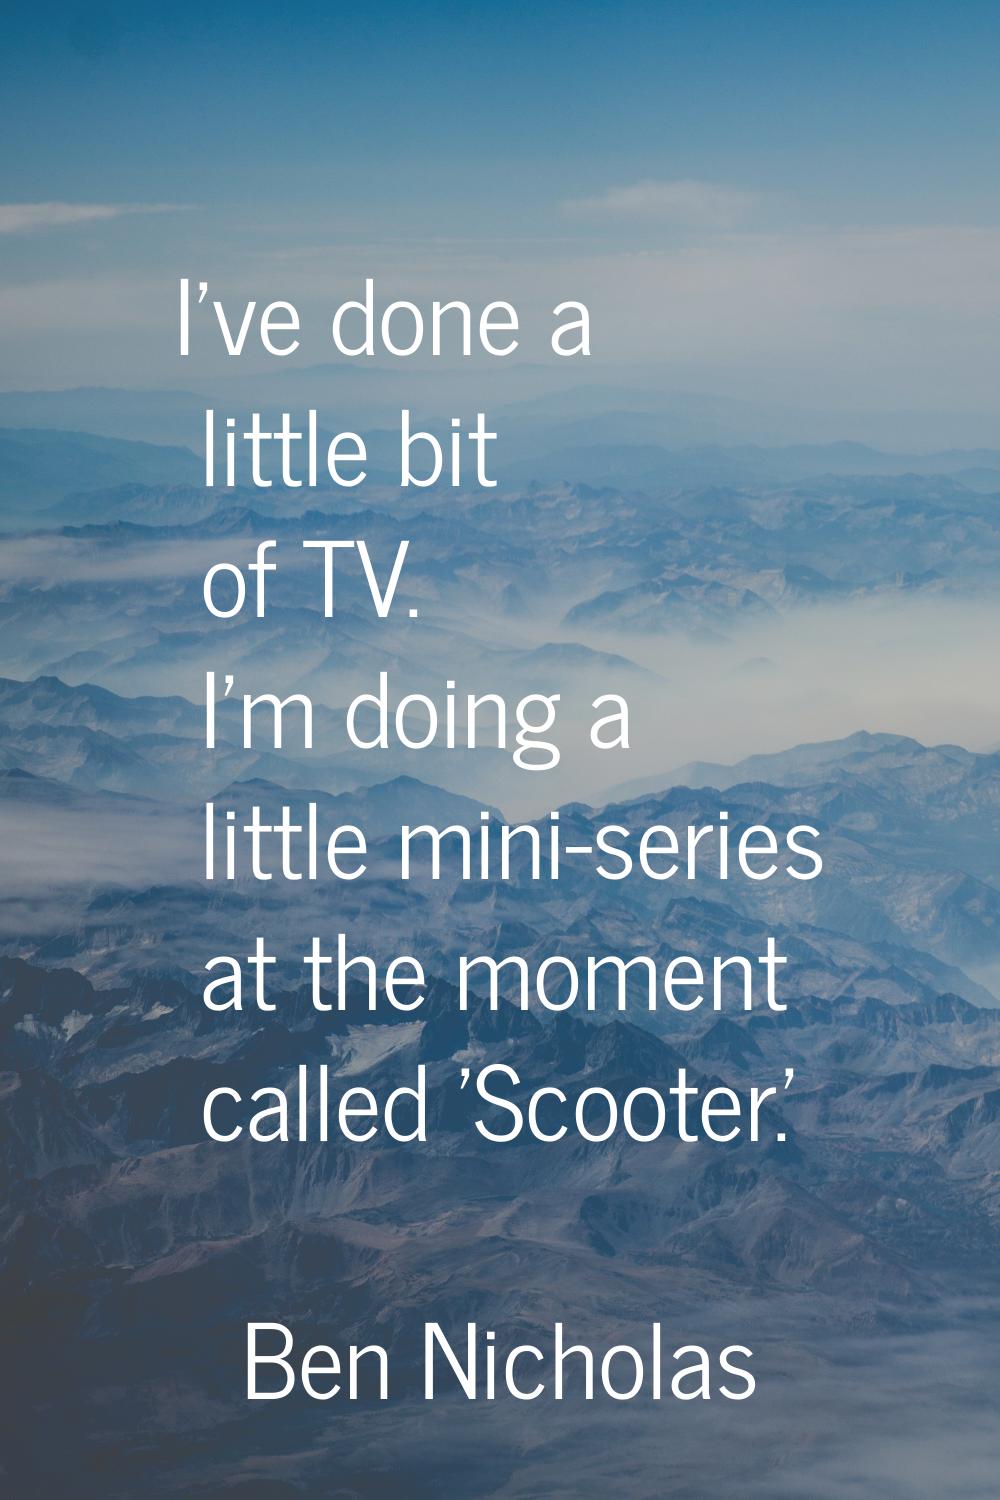 I've done a little bit of TV. I'm doing a little mini-series at the moment called 'Scooter.'